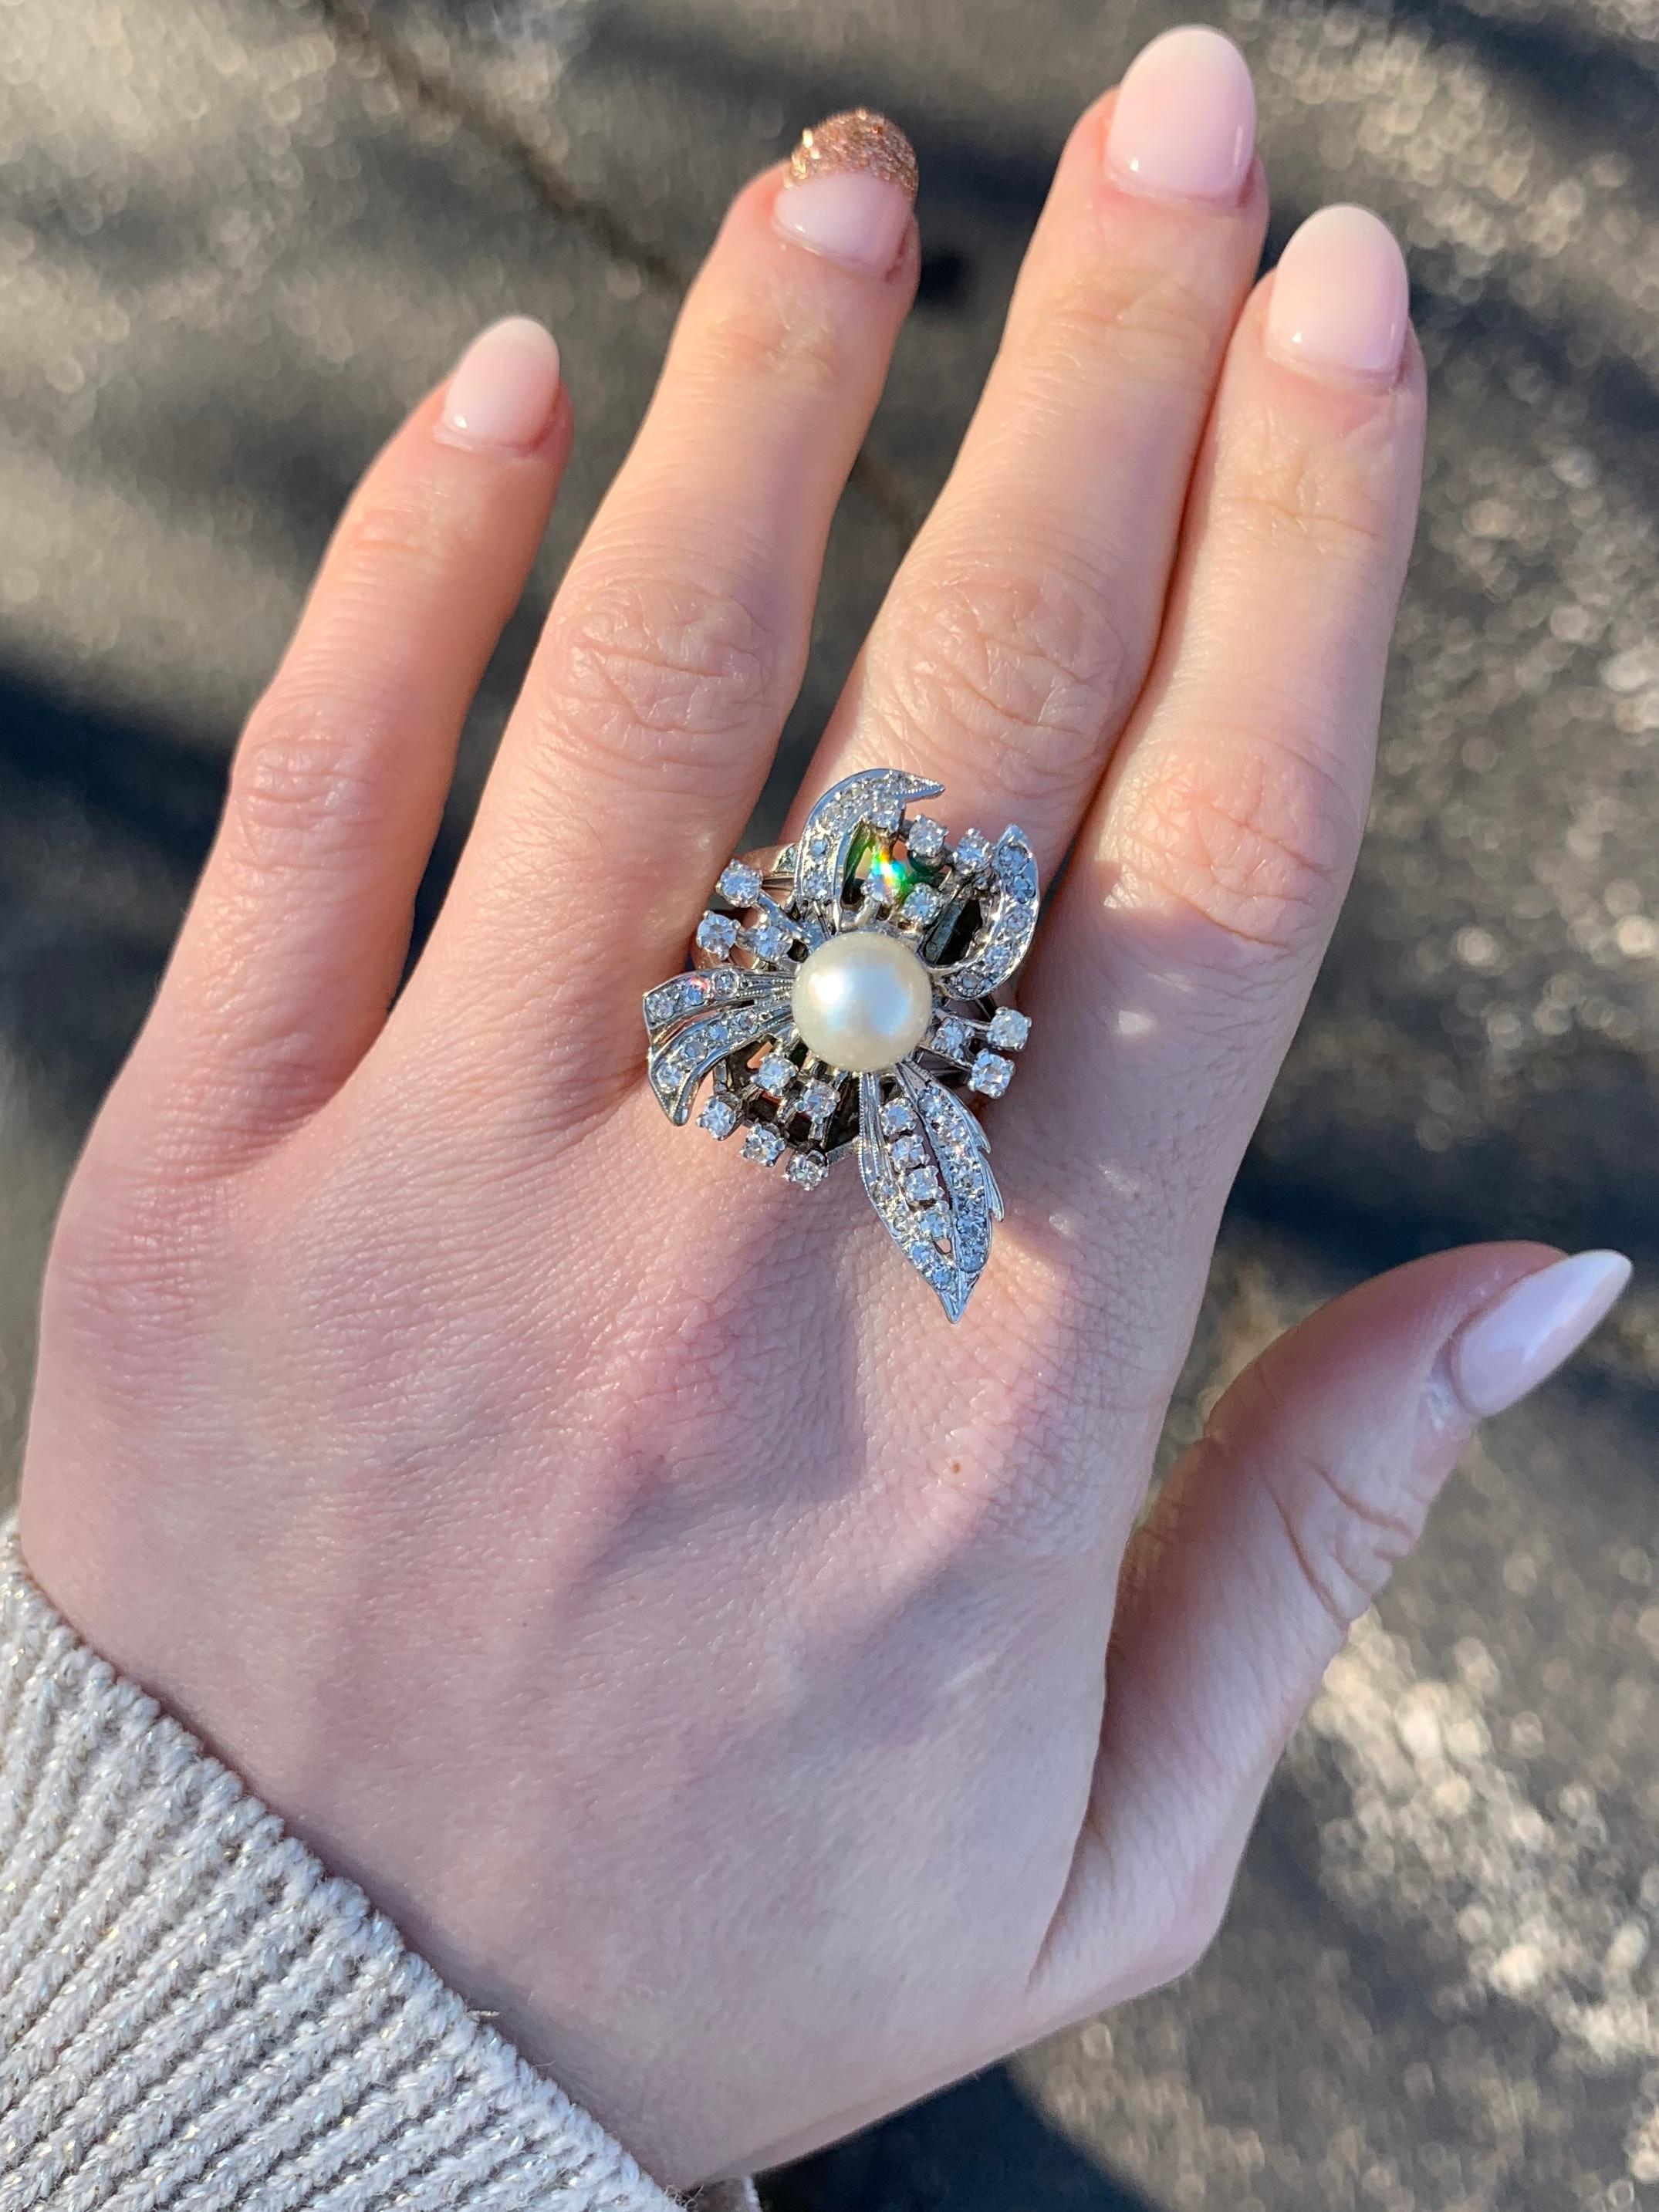 An elegant spray diamond ring, heavily influenced by the intricate and flowering designs of the Edwardian era. Ring features a 7.50mm white cultured pearl surrounded by 47 round diamonds at approximately 1.25 carats total weight, approximately H